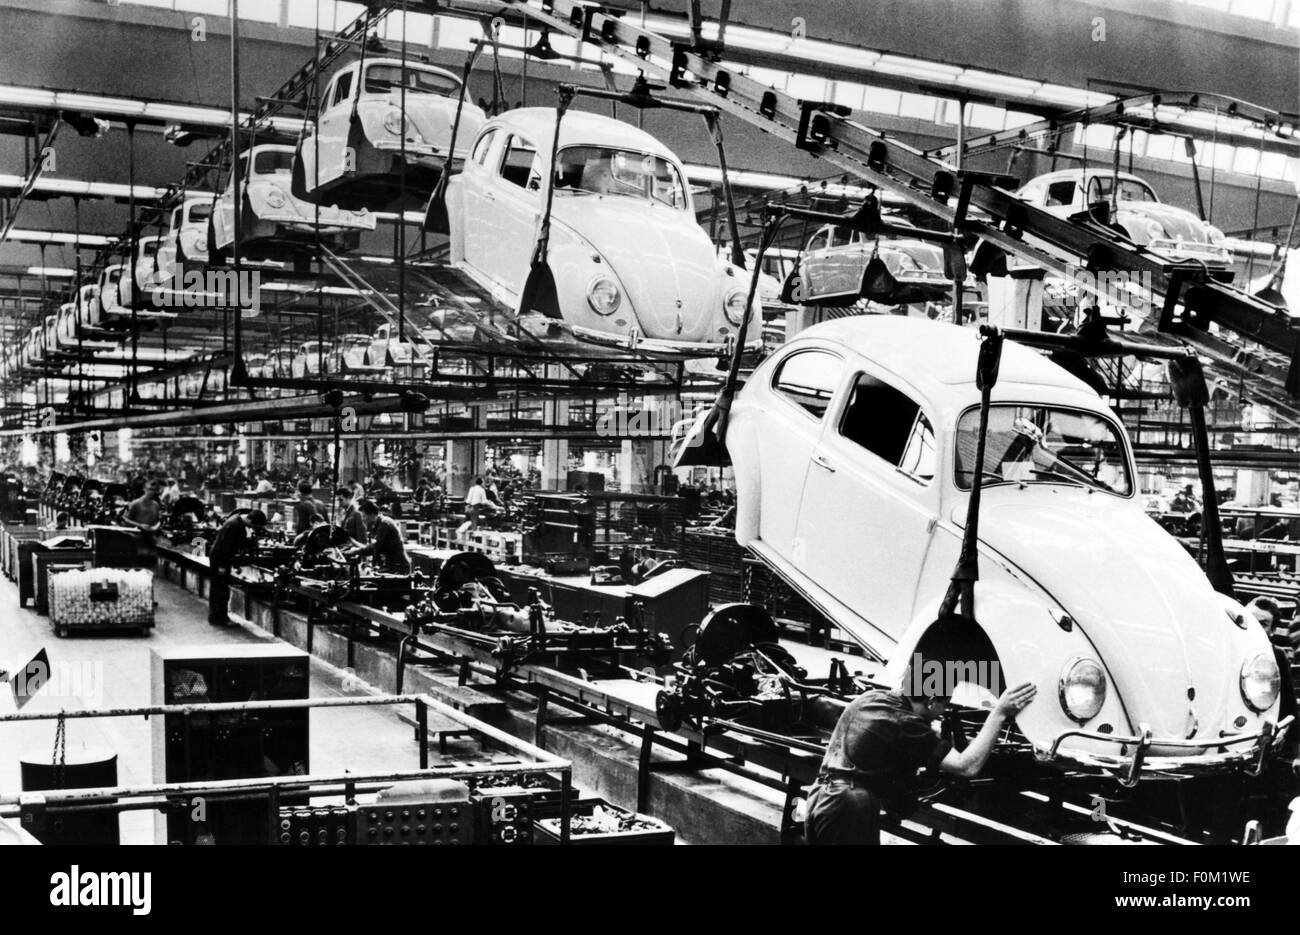 industry, car industry, Volkswagen, Volkswagen plant Wolfsburg, interior view, final assembly of VW Beetle 1300, 1960s, Additional-Rights-Clearences-Not Available Stock Photo